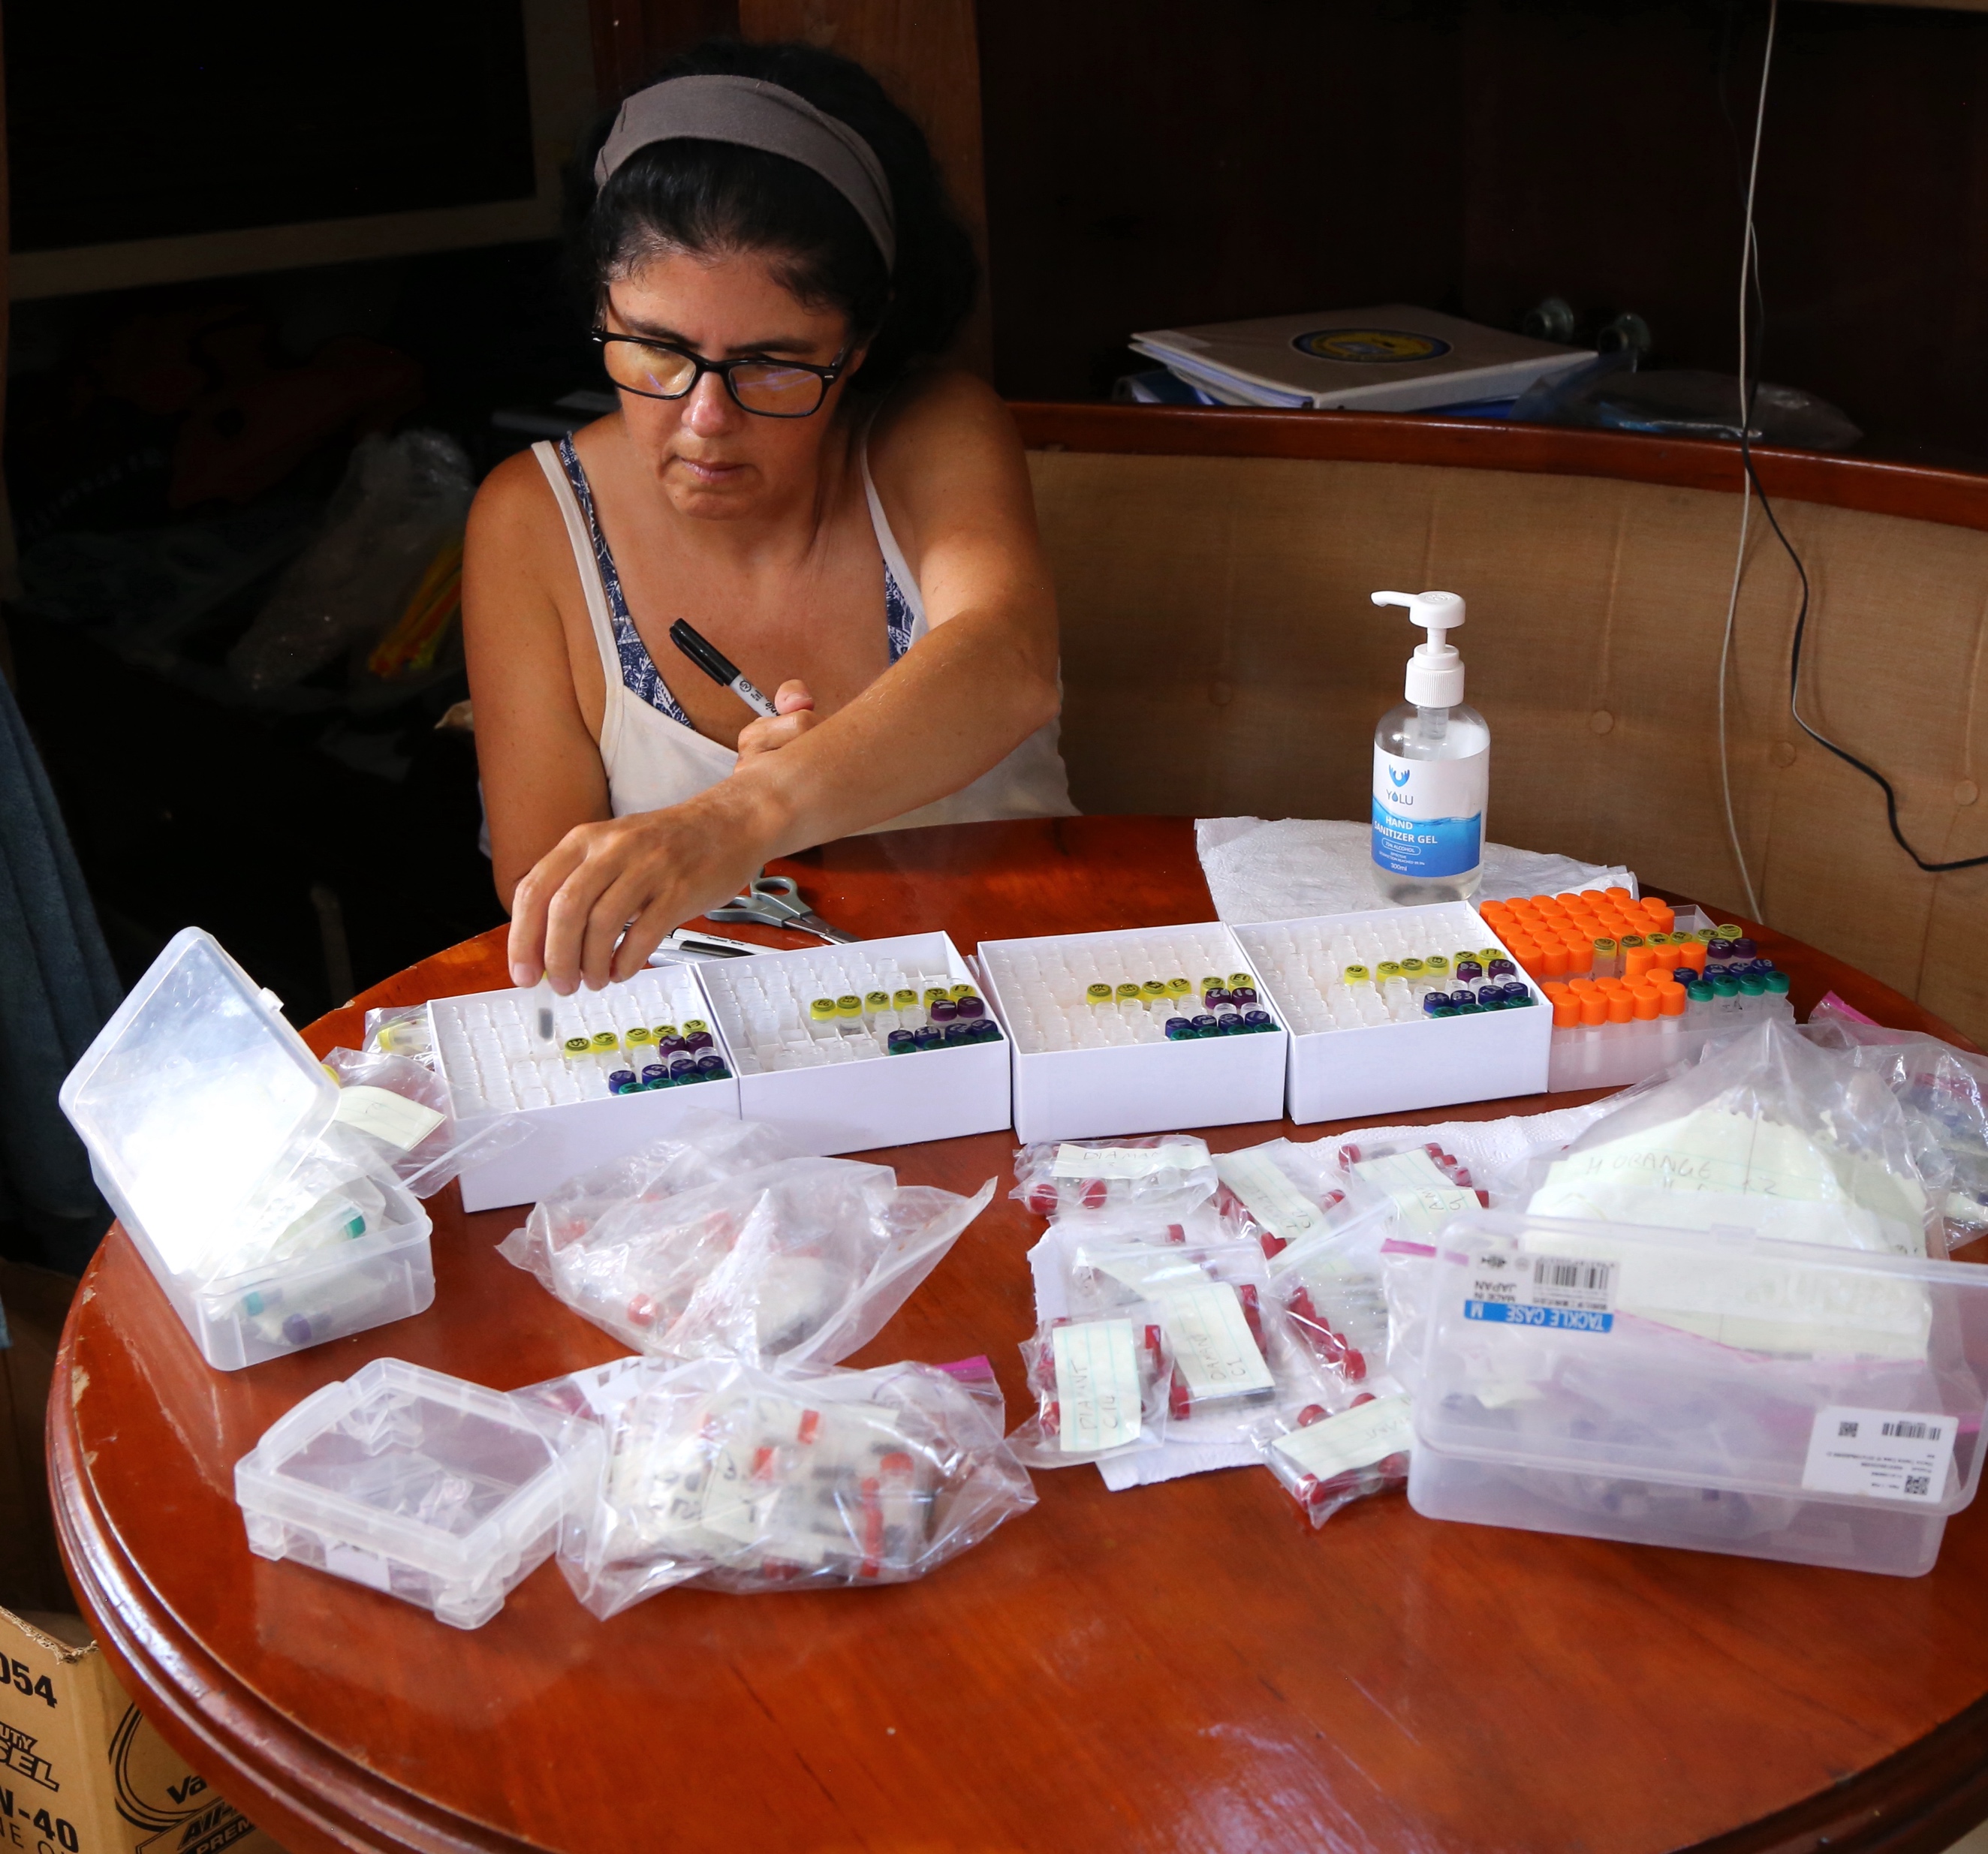 Sorting rat DNA samples for storage and distribution to various analysis laboratories (right) on board Jocara.